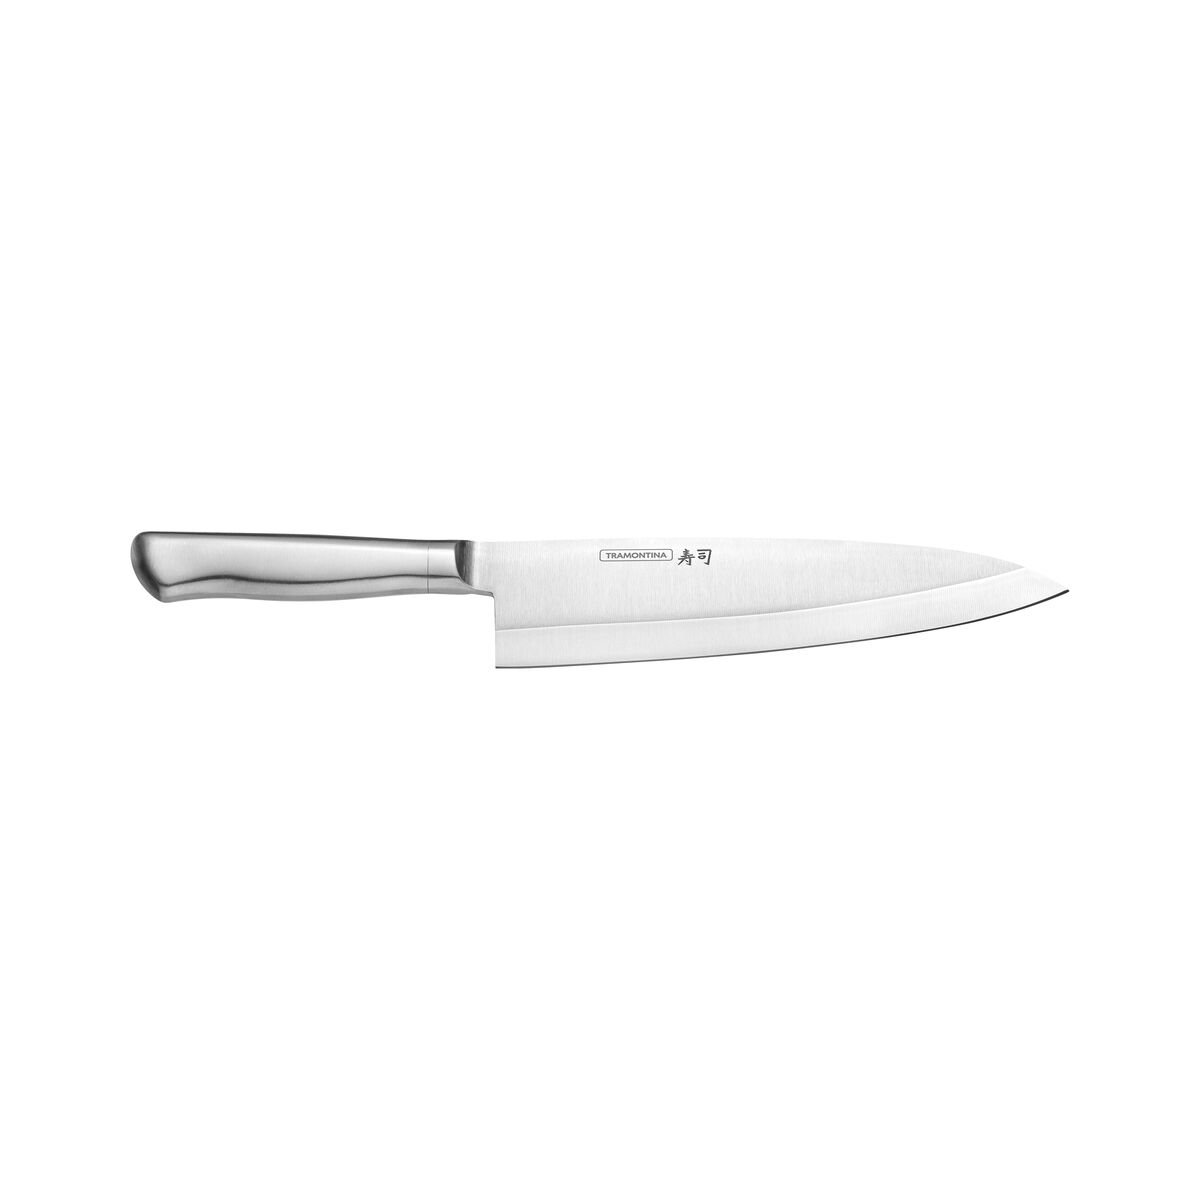 Tramontina Sushi Diamond 8" stainless steel deba knife with stainless steel handle